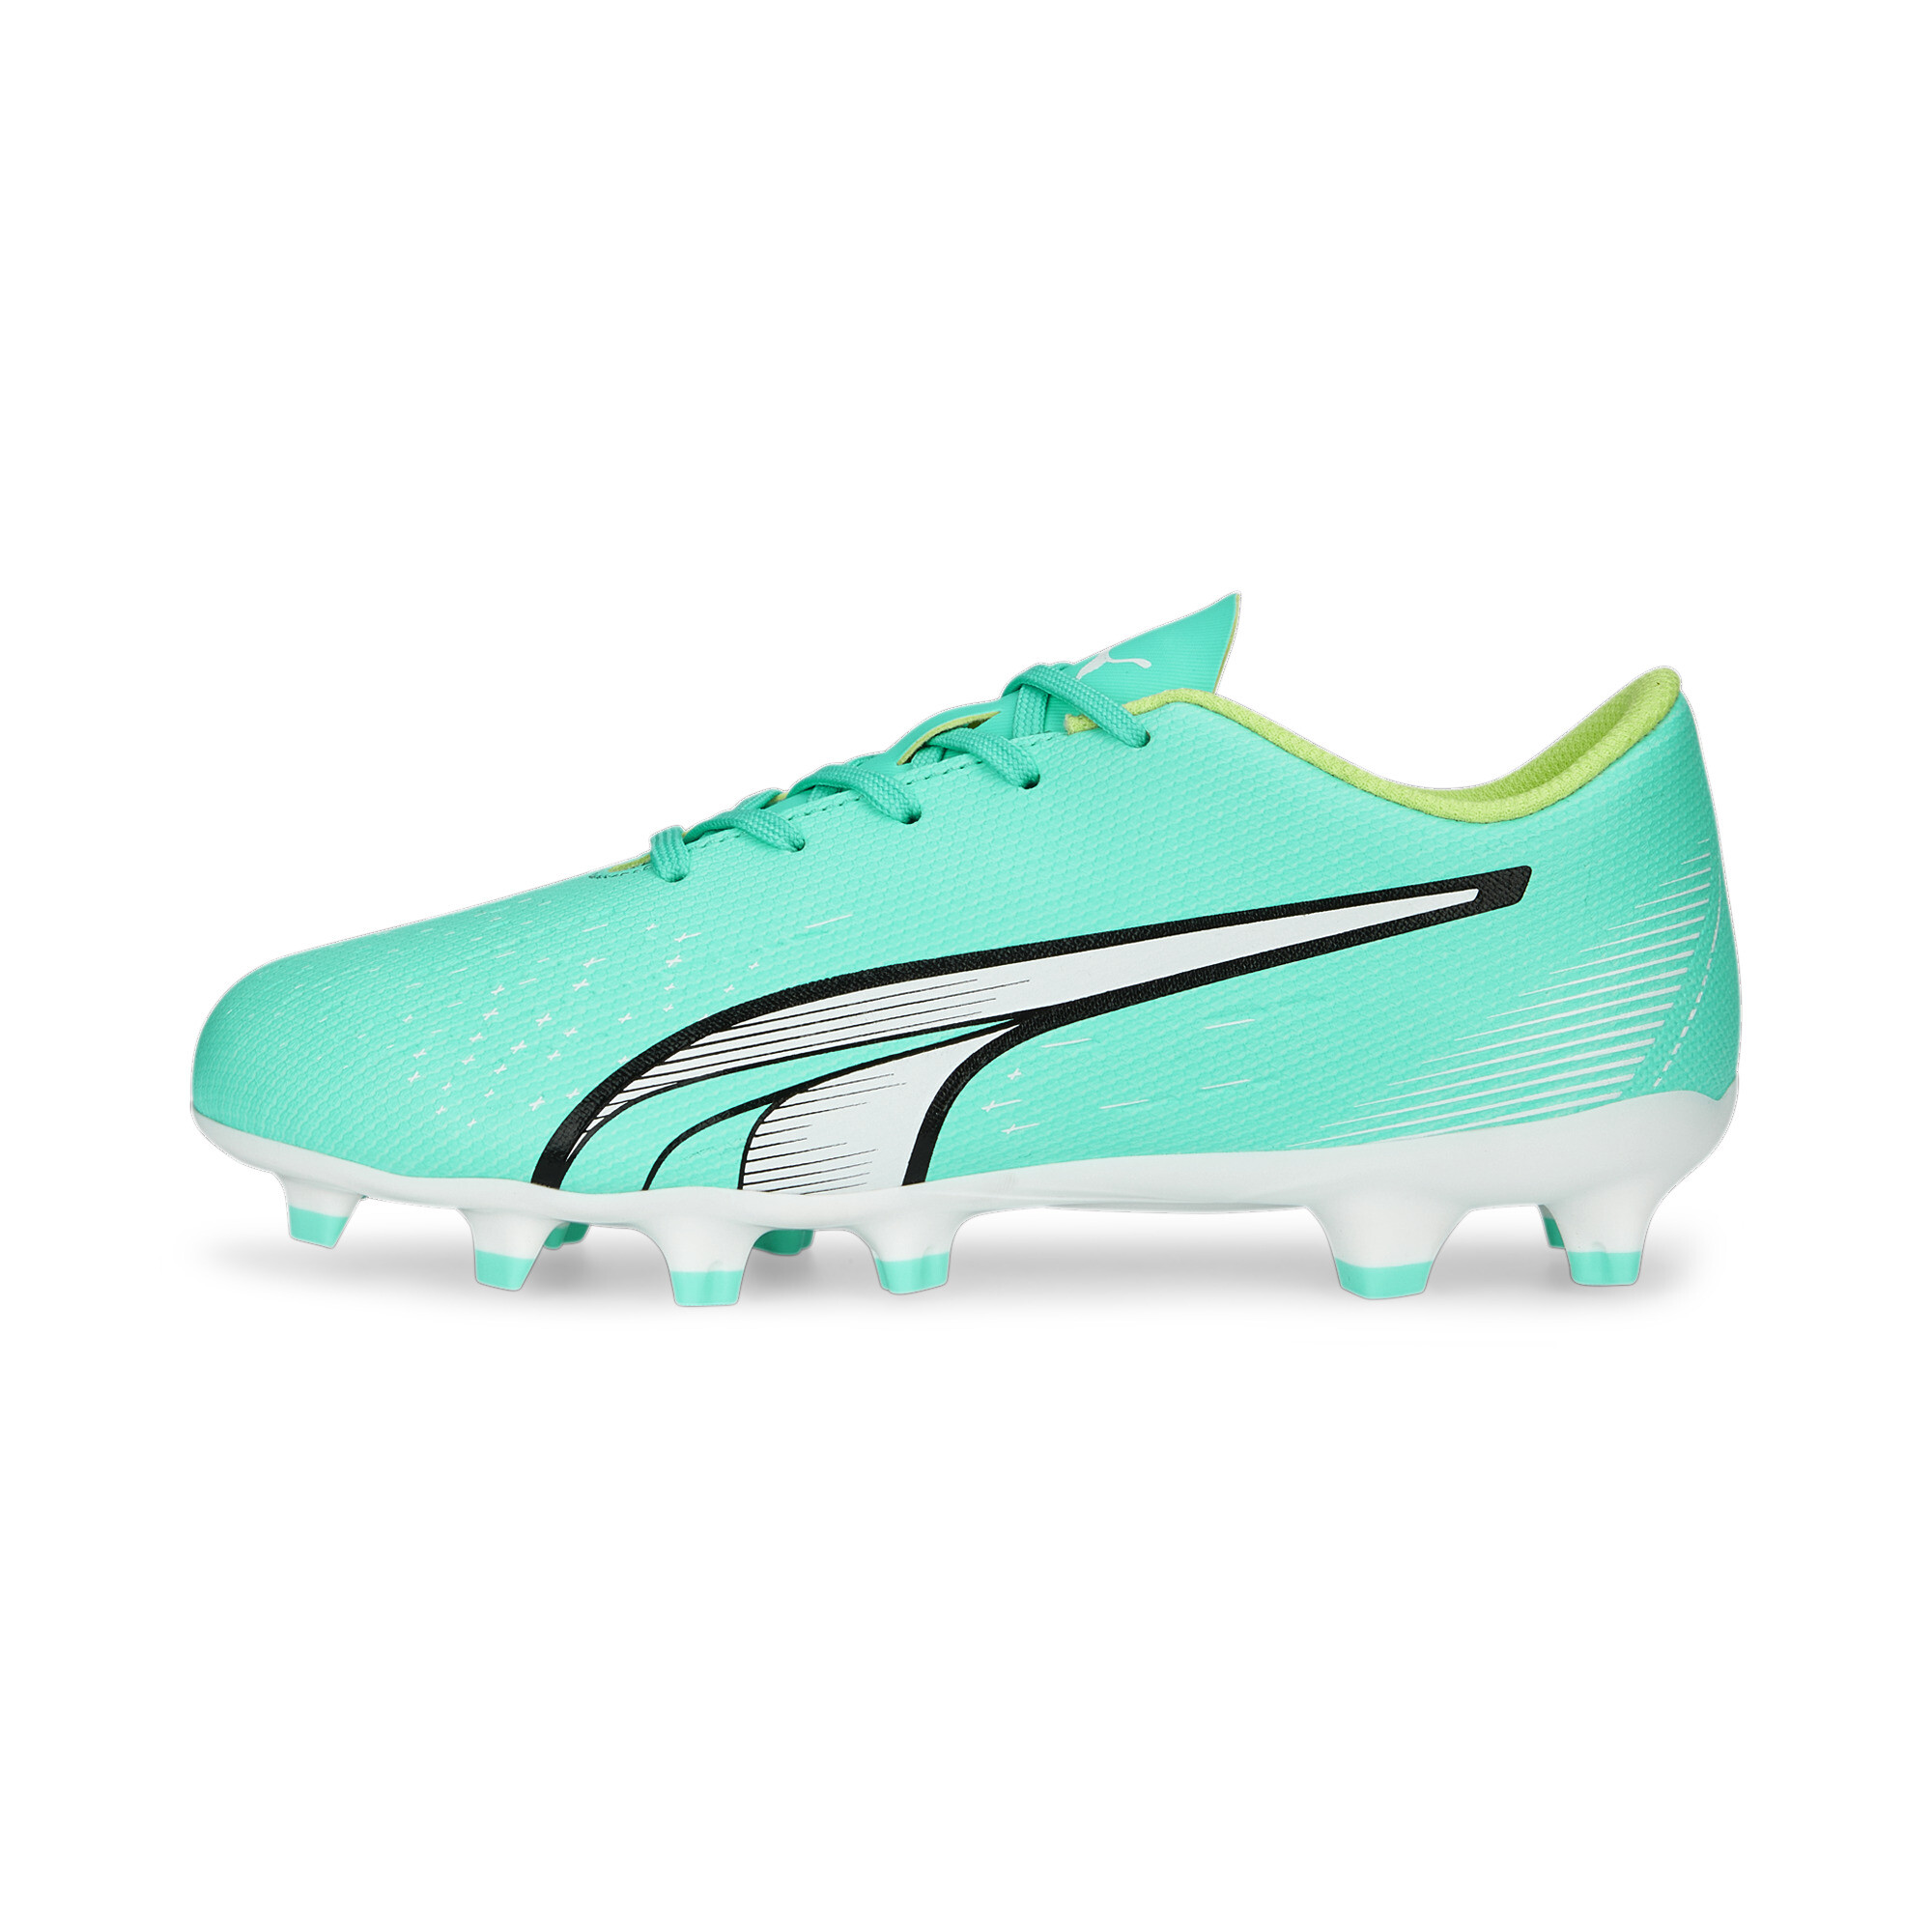 PUMA ULTRA Play FG/AG Football Boots Youth In 40 - Green, Size EU 28.5